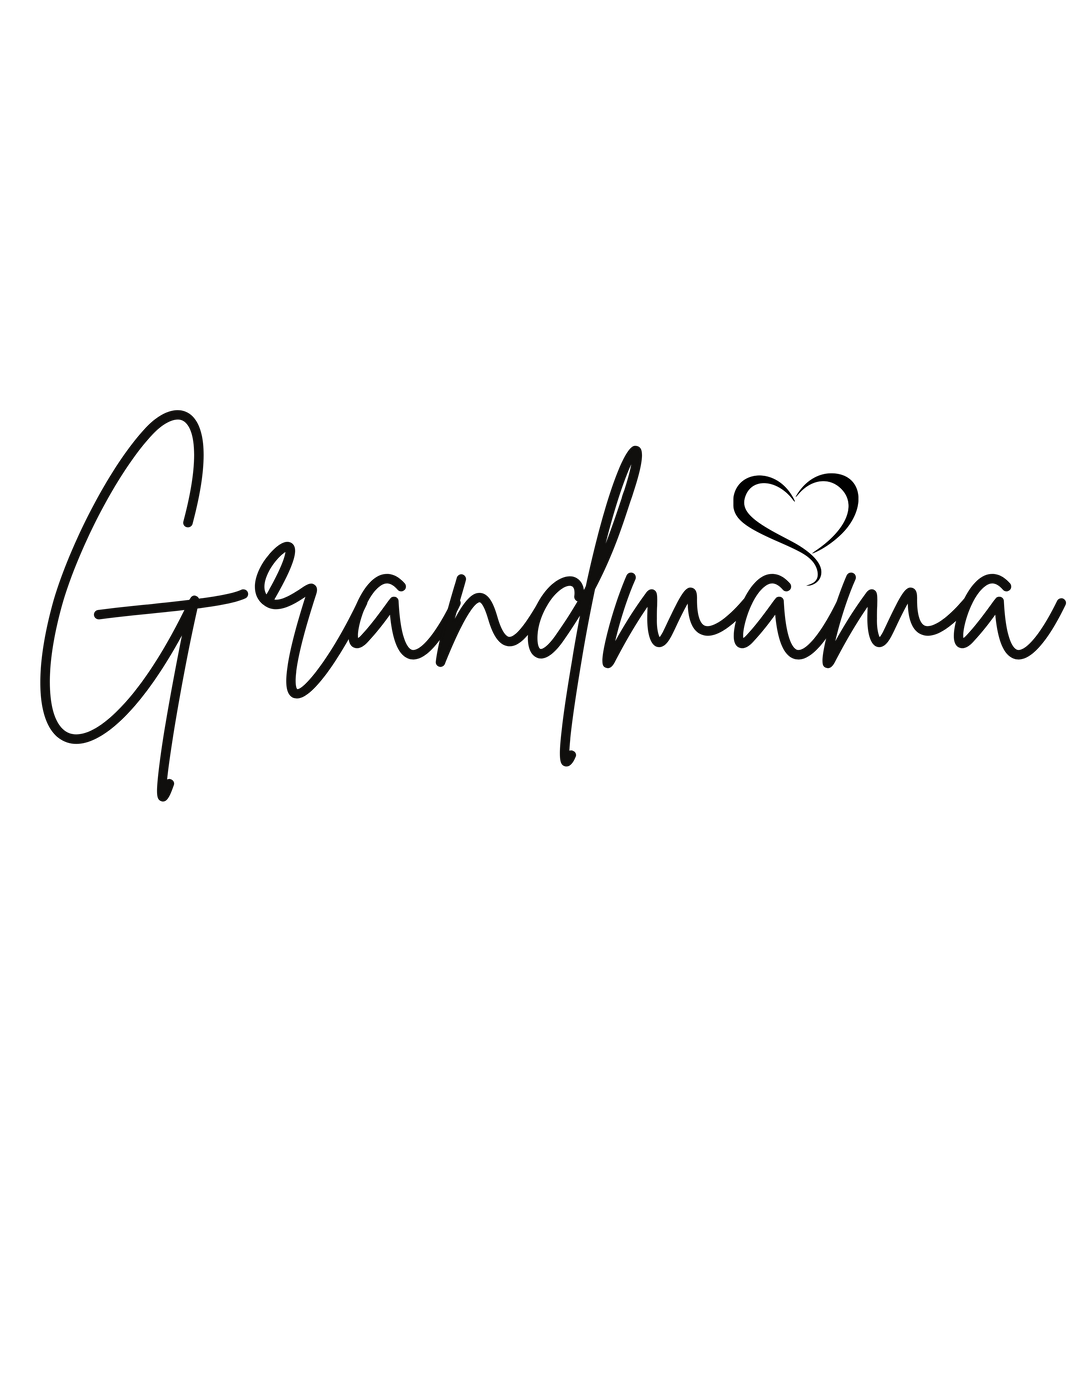 Grandmama Tee: Handwritten black calligraphy on black background. 100% ring-spun cotton tee, garment-dyed for coziness. Relaxed fit, double-needle stitching, no side-seams for durability and shape retention.